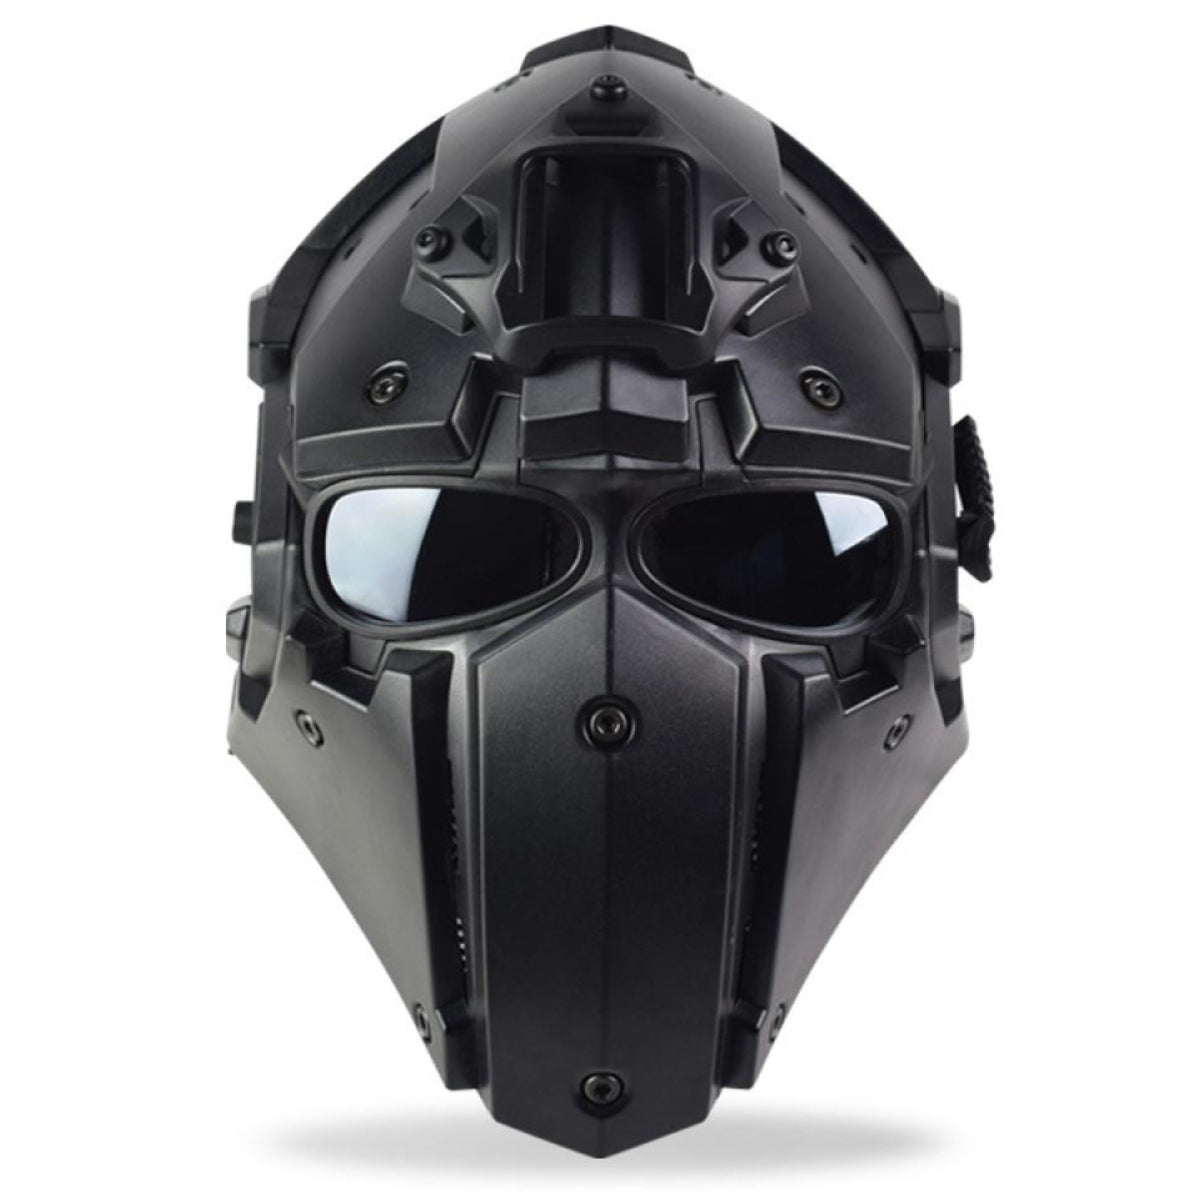 WOSPORT THB TACTICAL HELMET WITH NVG SHROUD AND TRANSFER BASE HL-90-BK